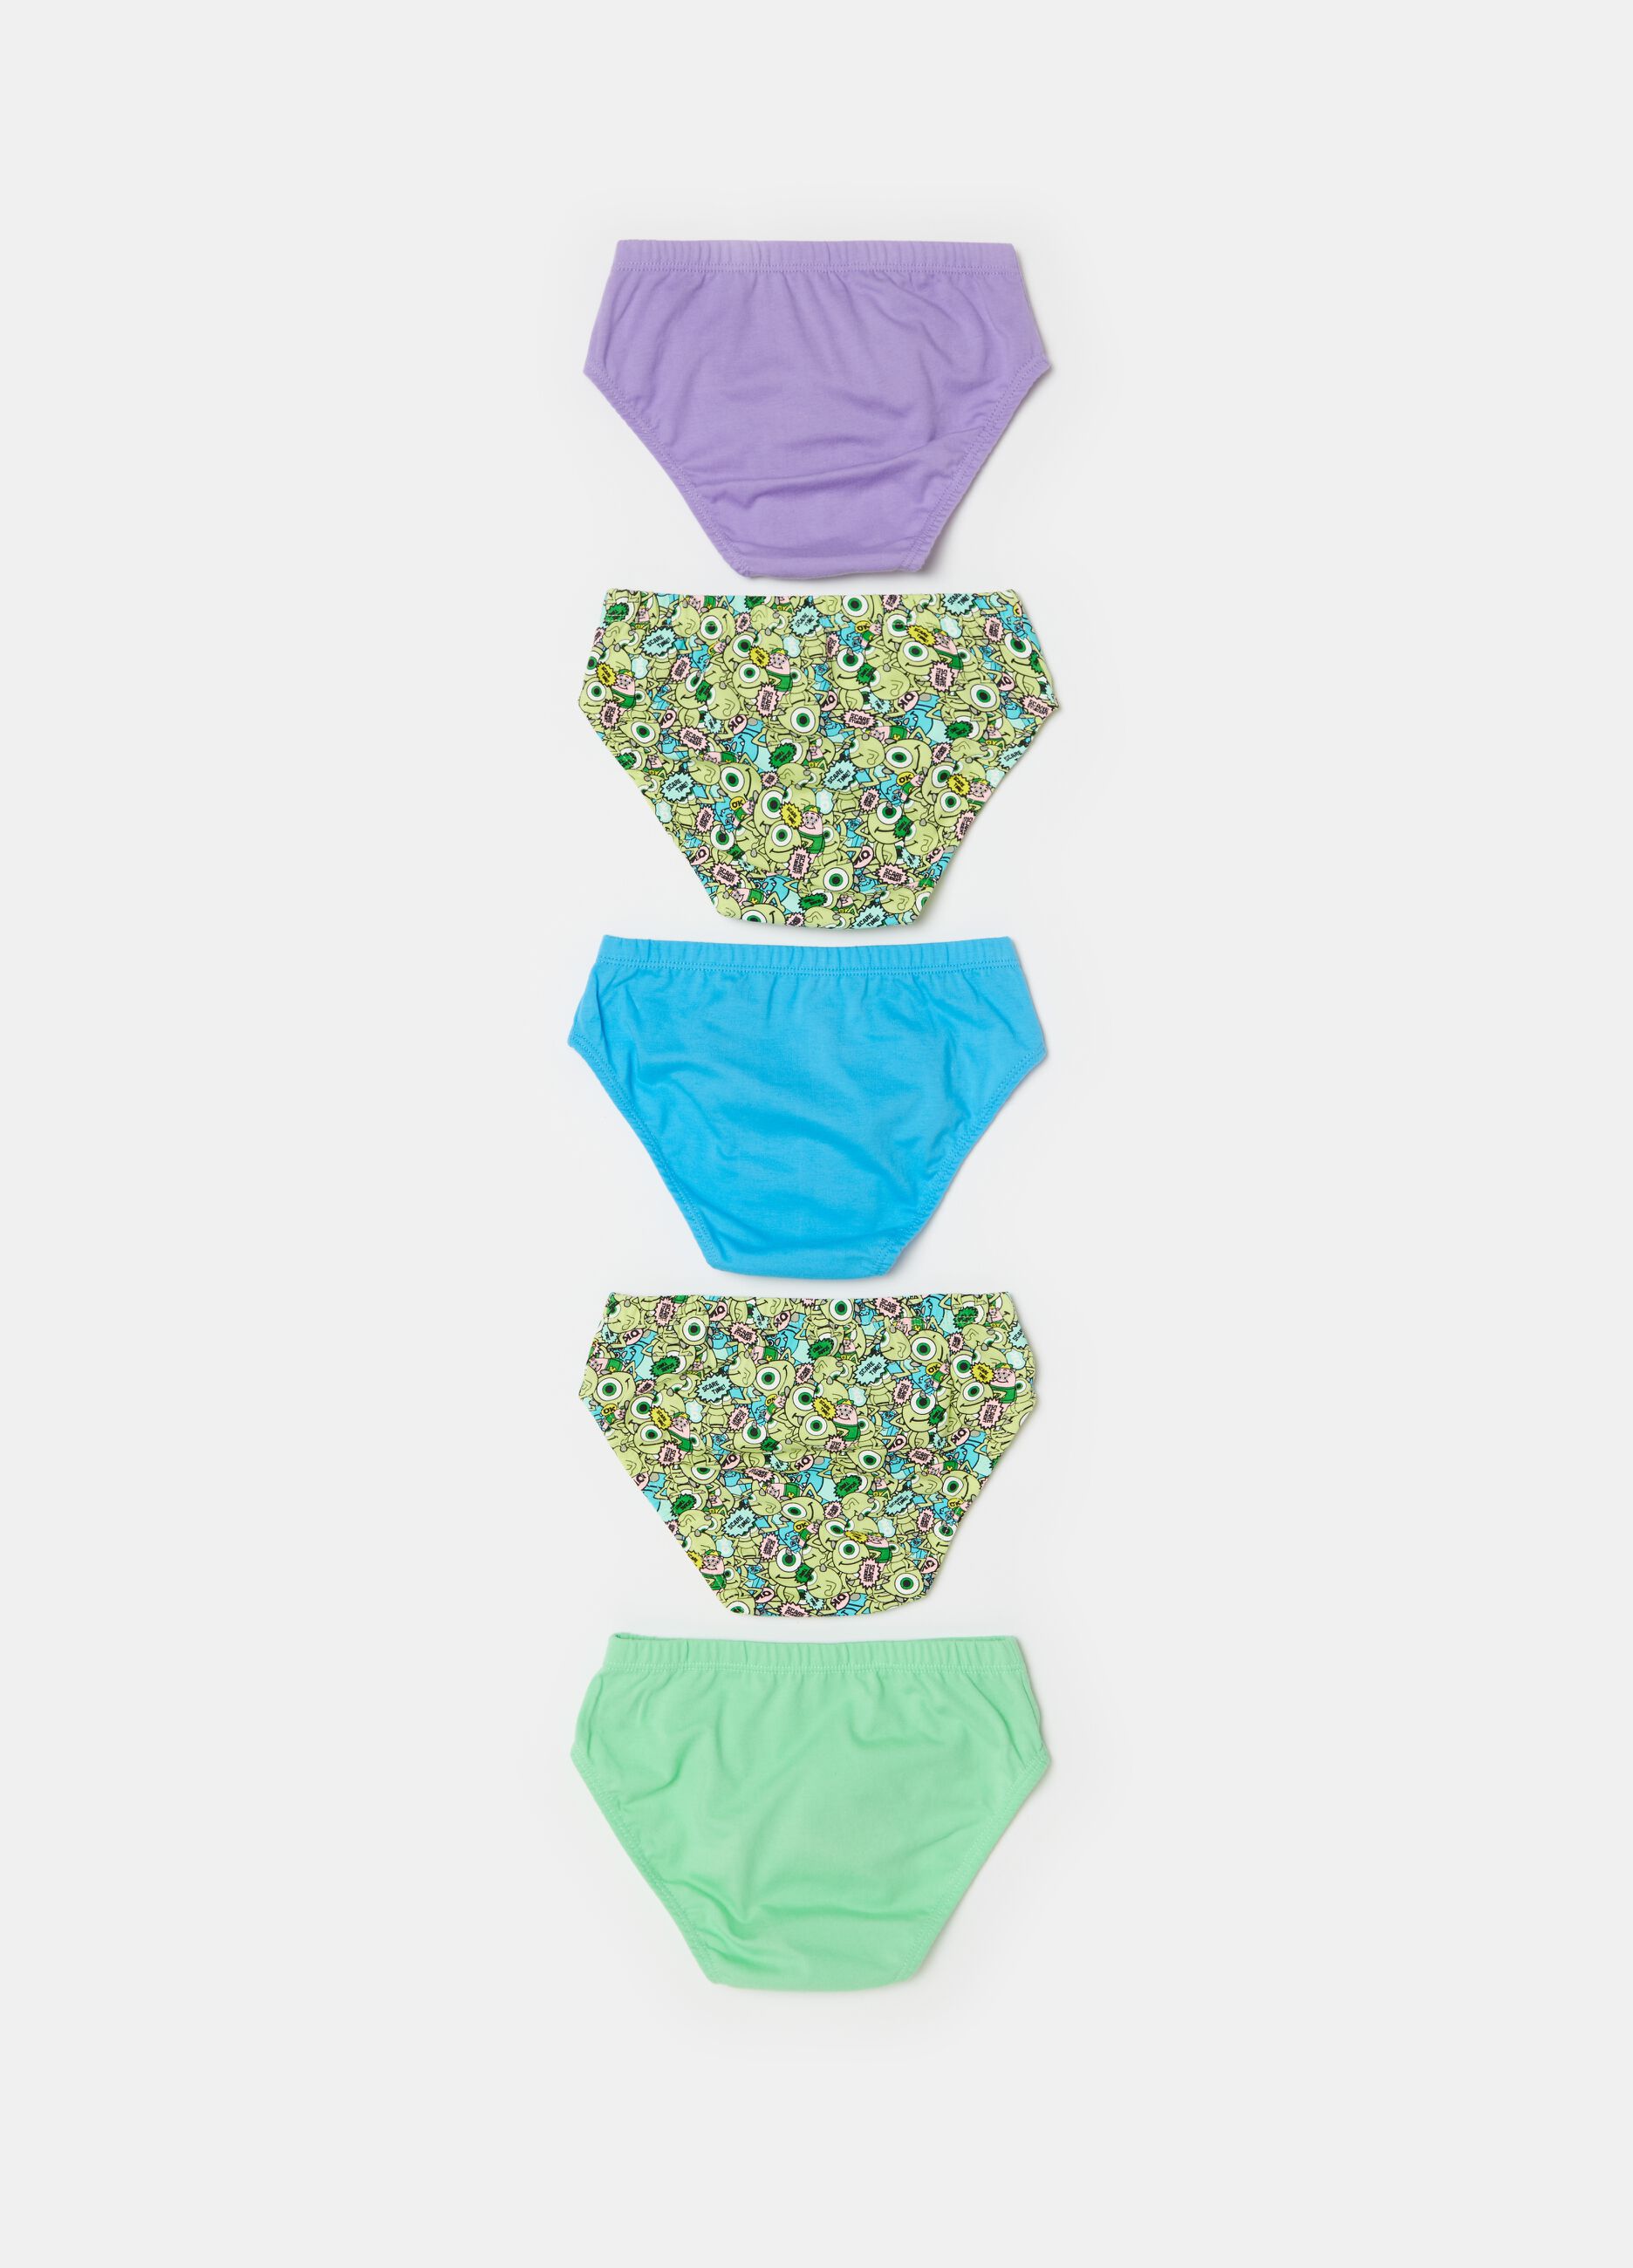 Five-pack cotton briefs with Monsters Inc. print